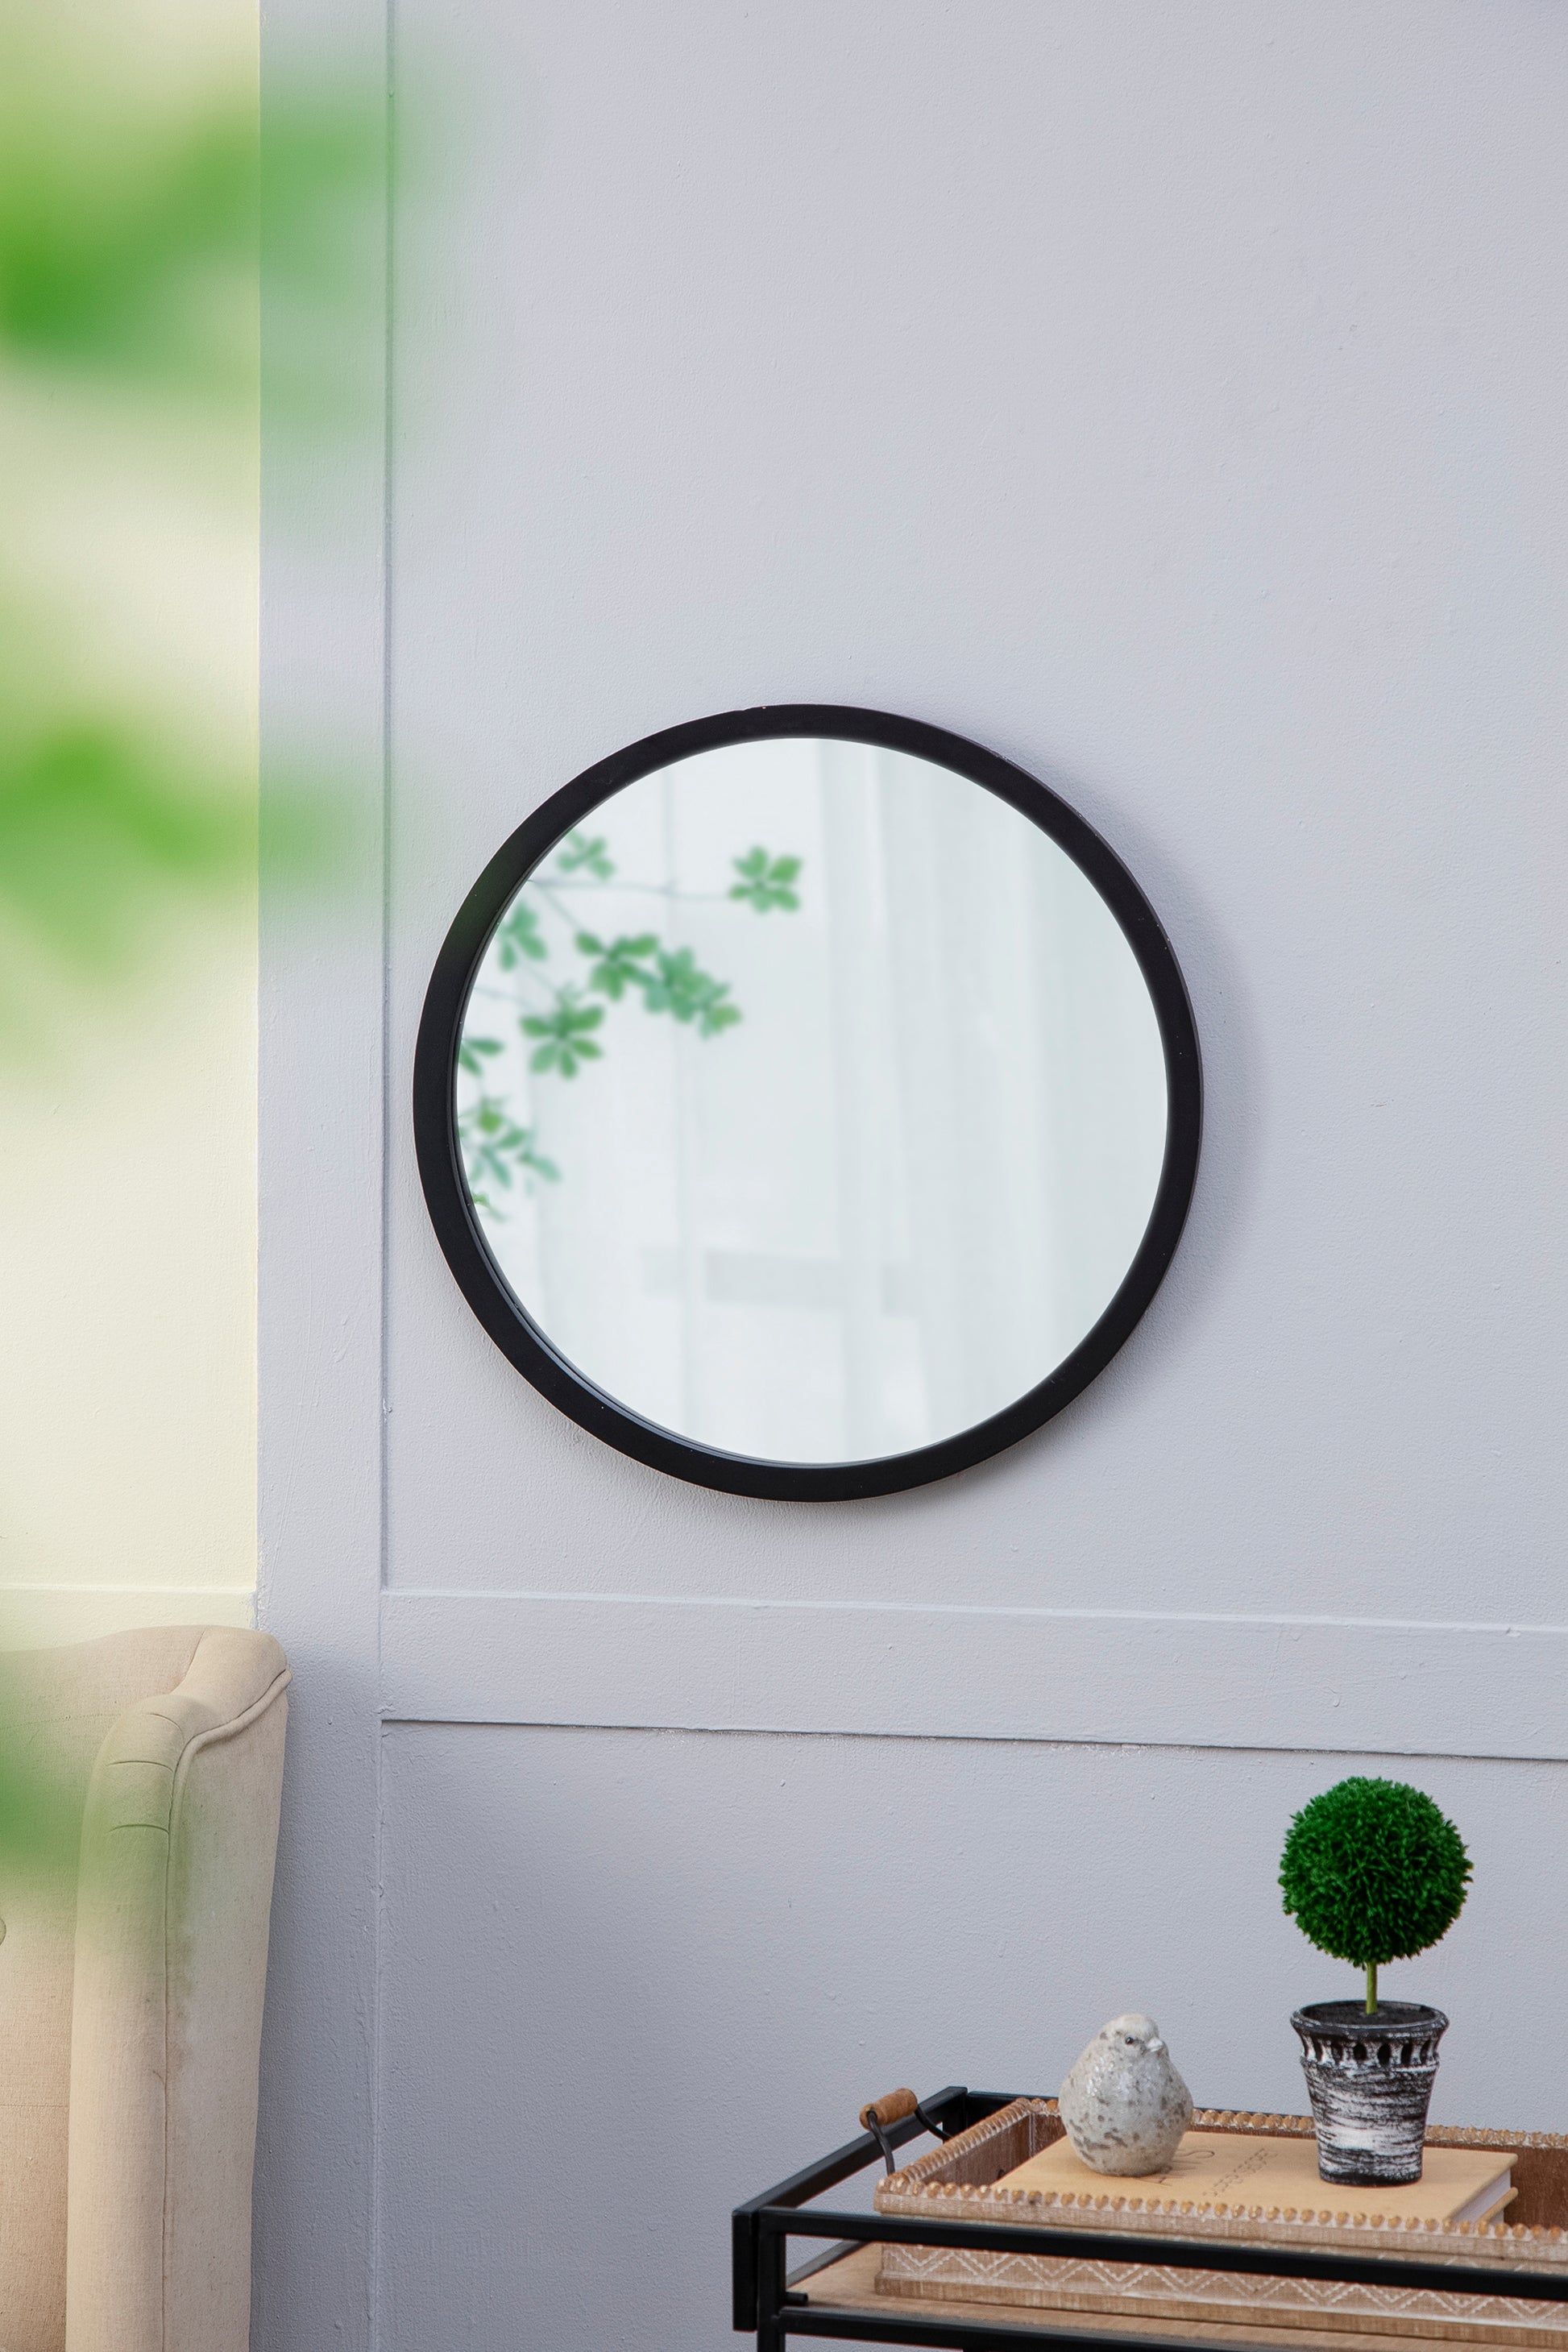 20" x 20" Circle Wall Mirror with Wooden Frame and black-wood+glass